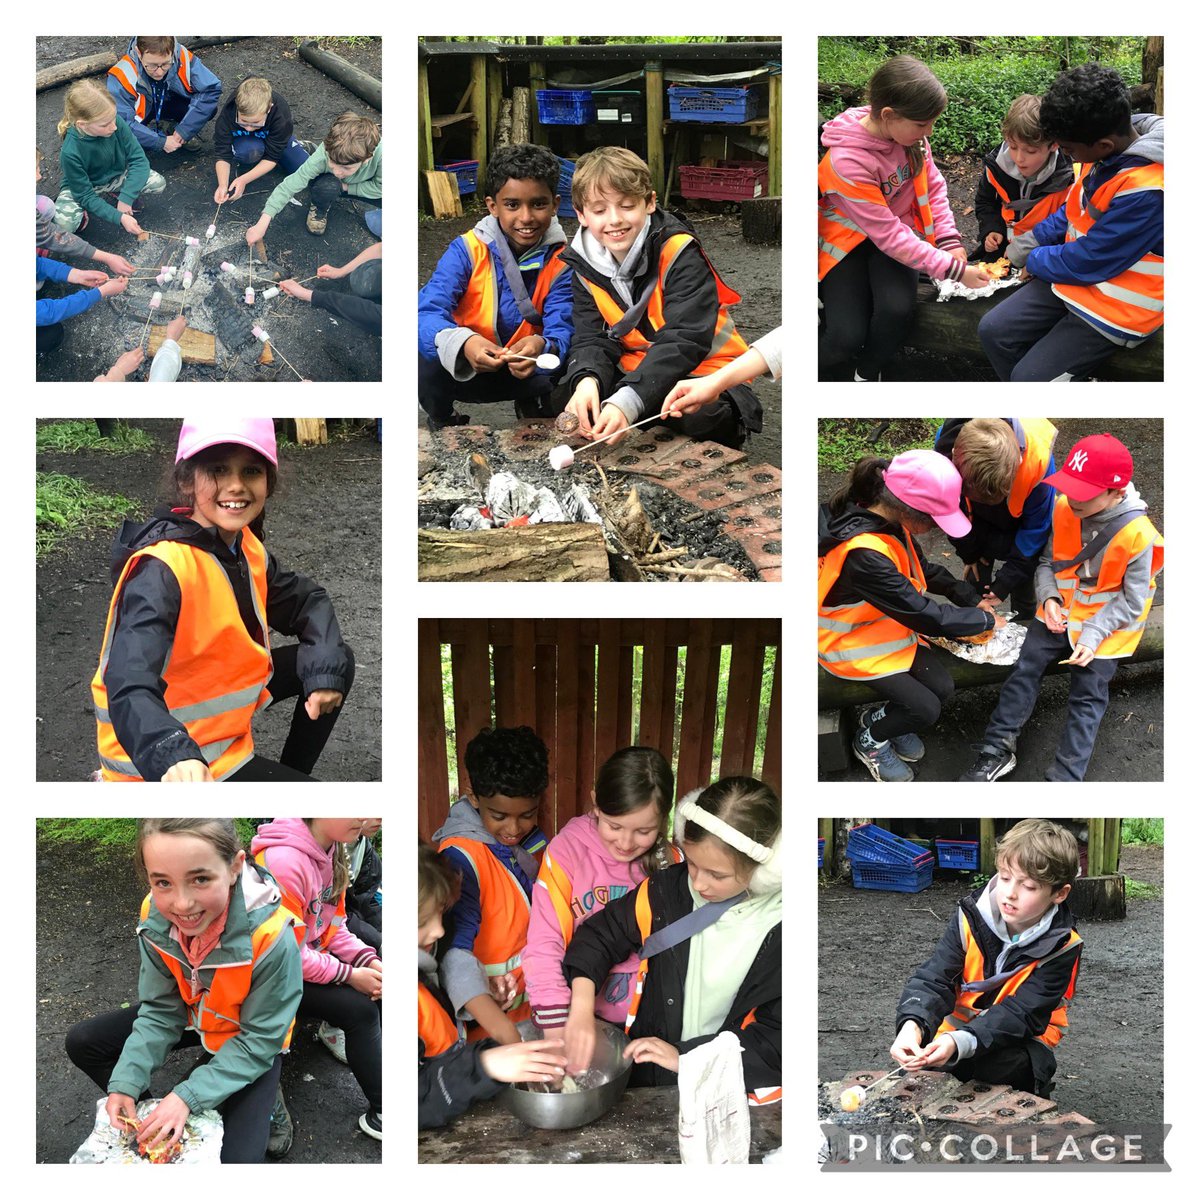 Y4 still really enjoy themselves @scoutadventures Gilwell Park.